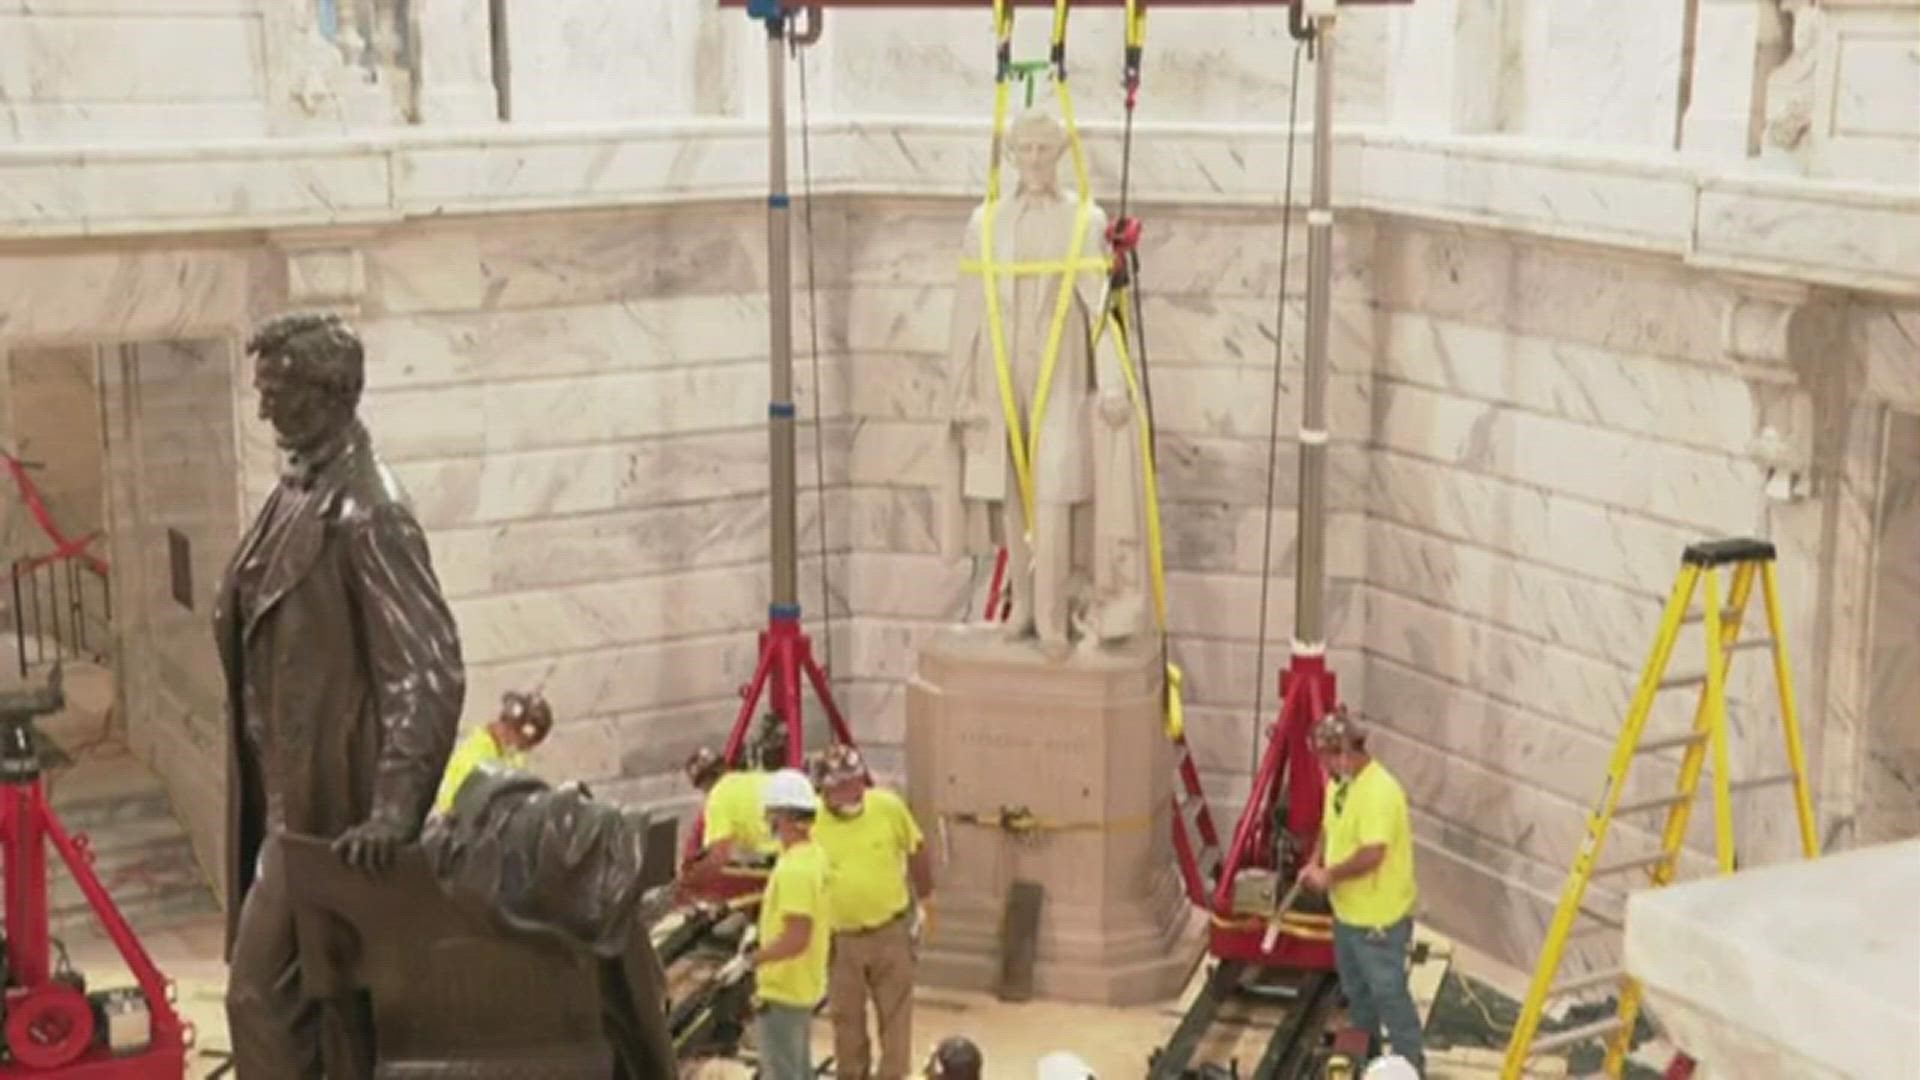 Gov. Andy Beshear was there as crews worked on the removal process. He ceremoniously pushed button to a rig that lifted the marble statue off its pedestal.